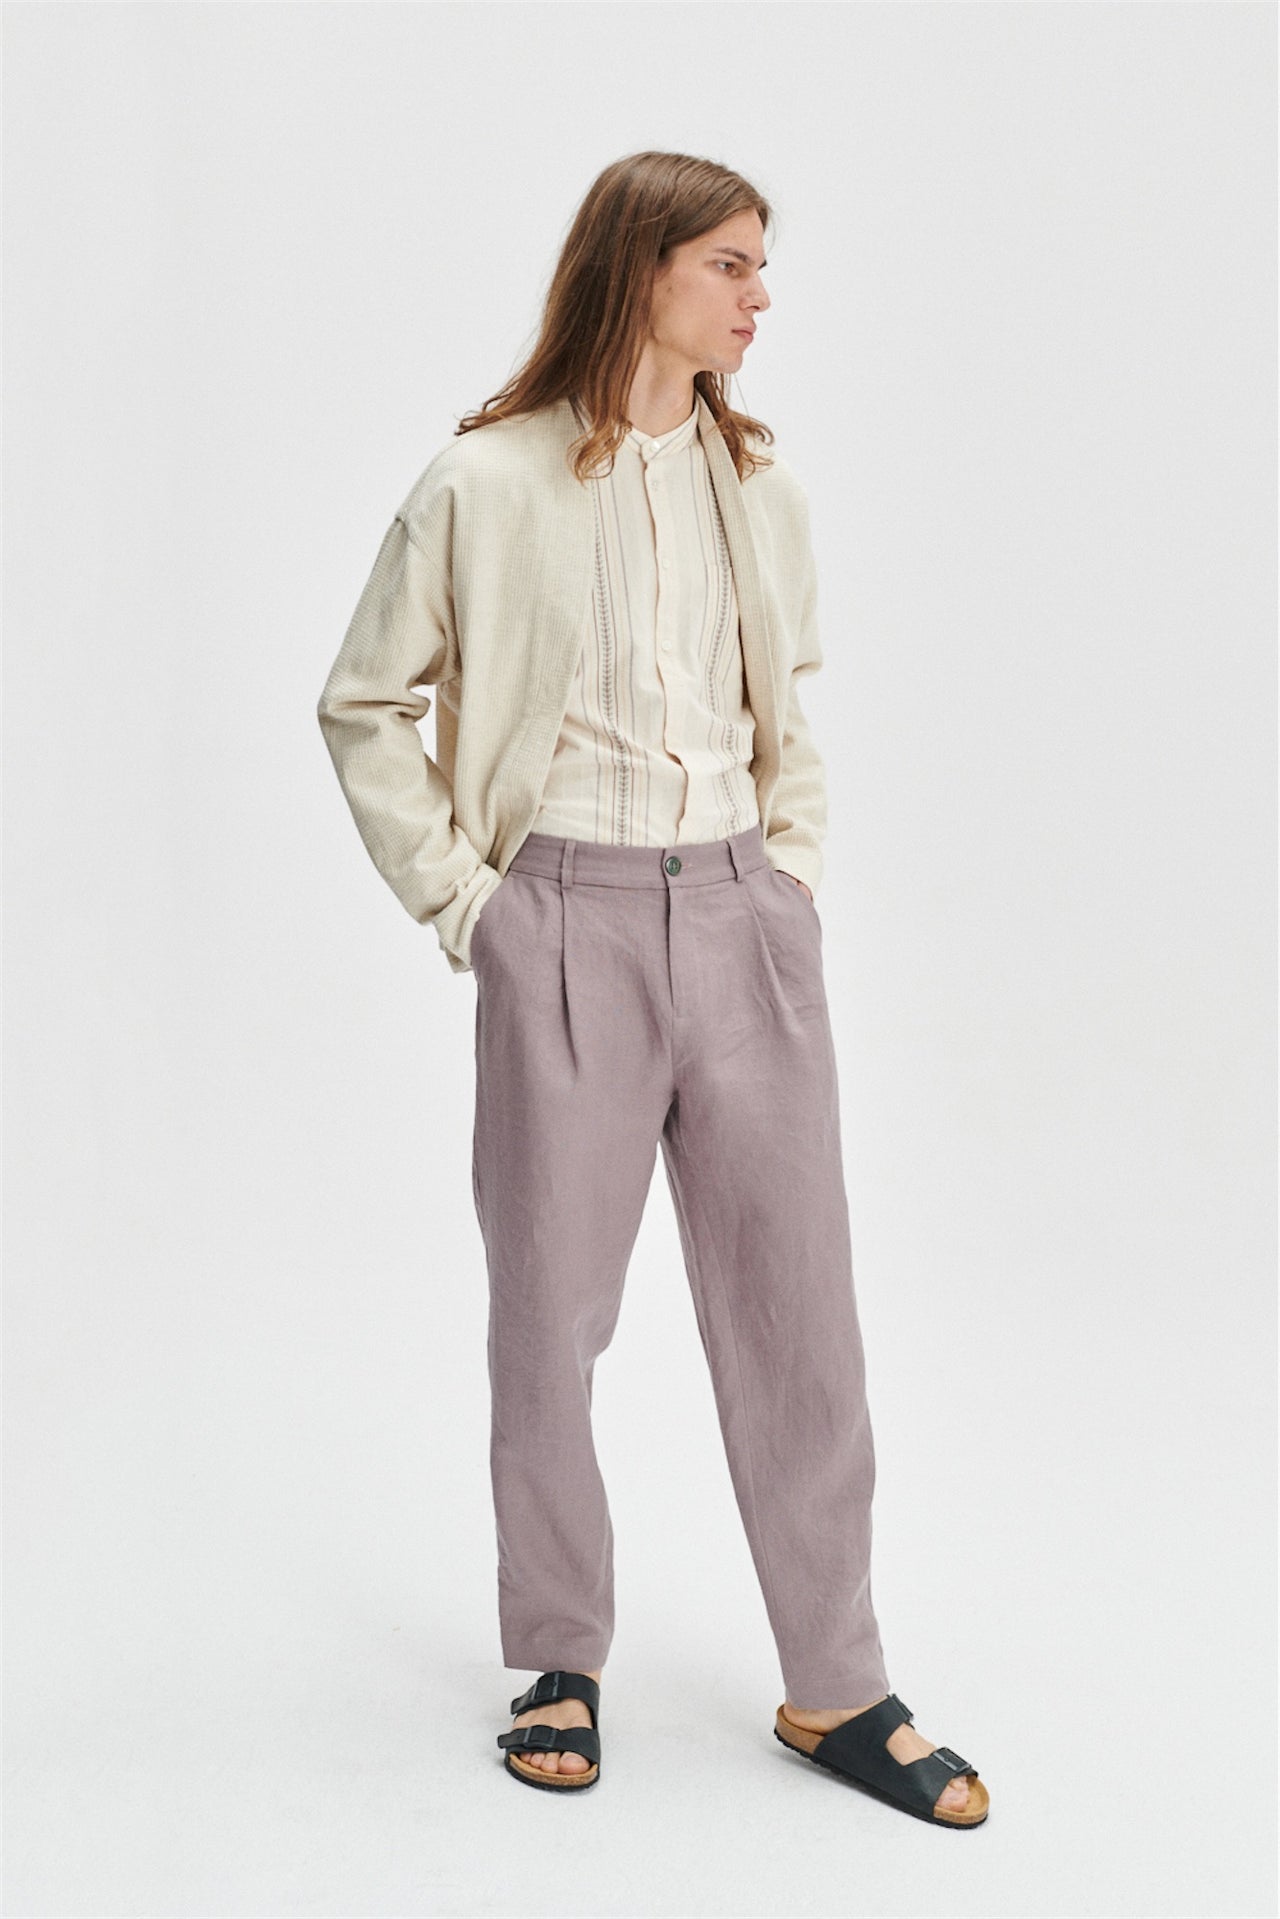 Minimal Kimono in a Light Beige Structural Waffled Japanese Cotton and Linen